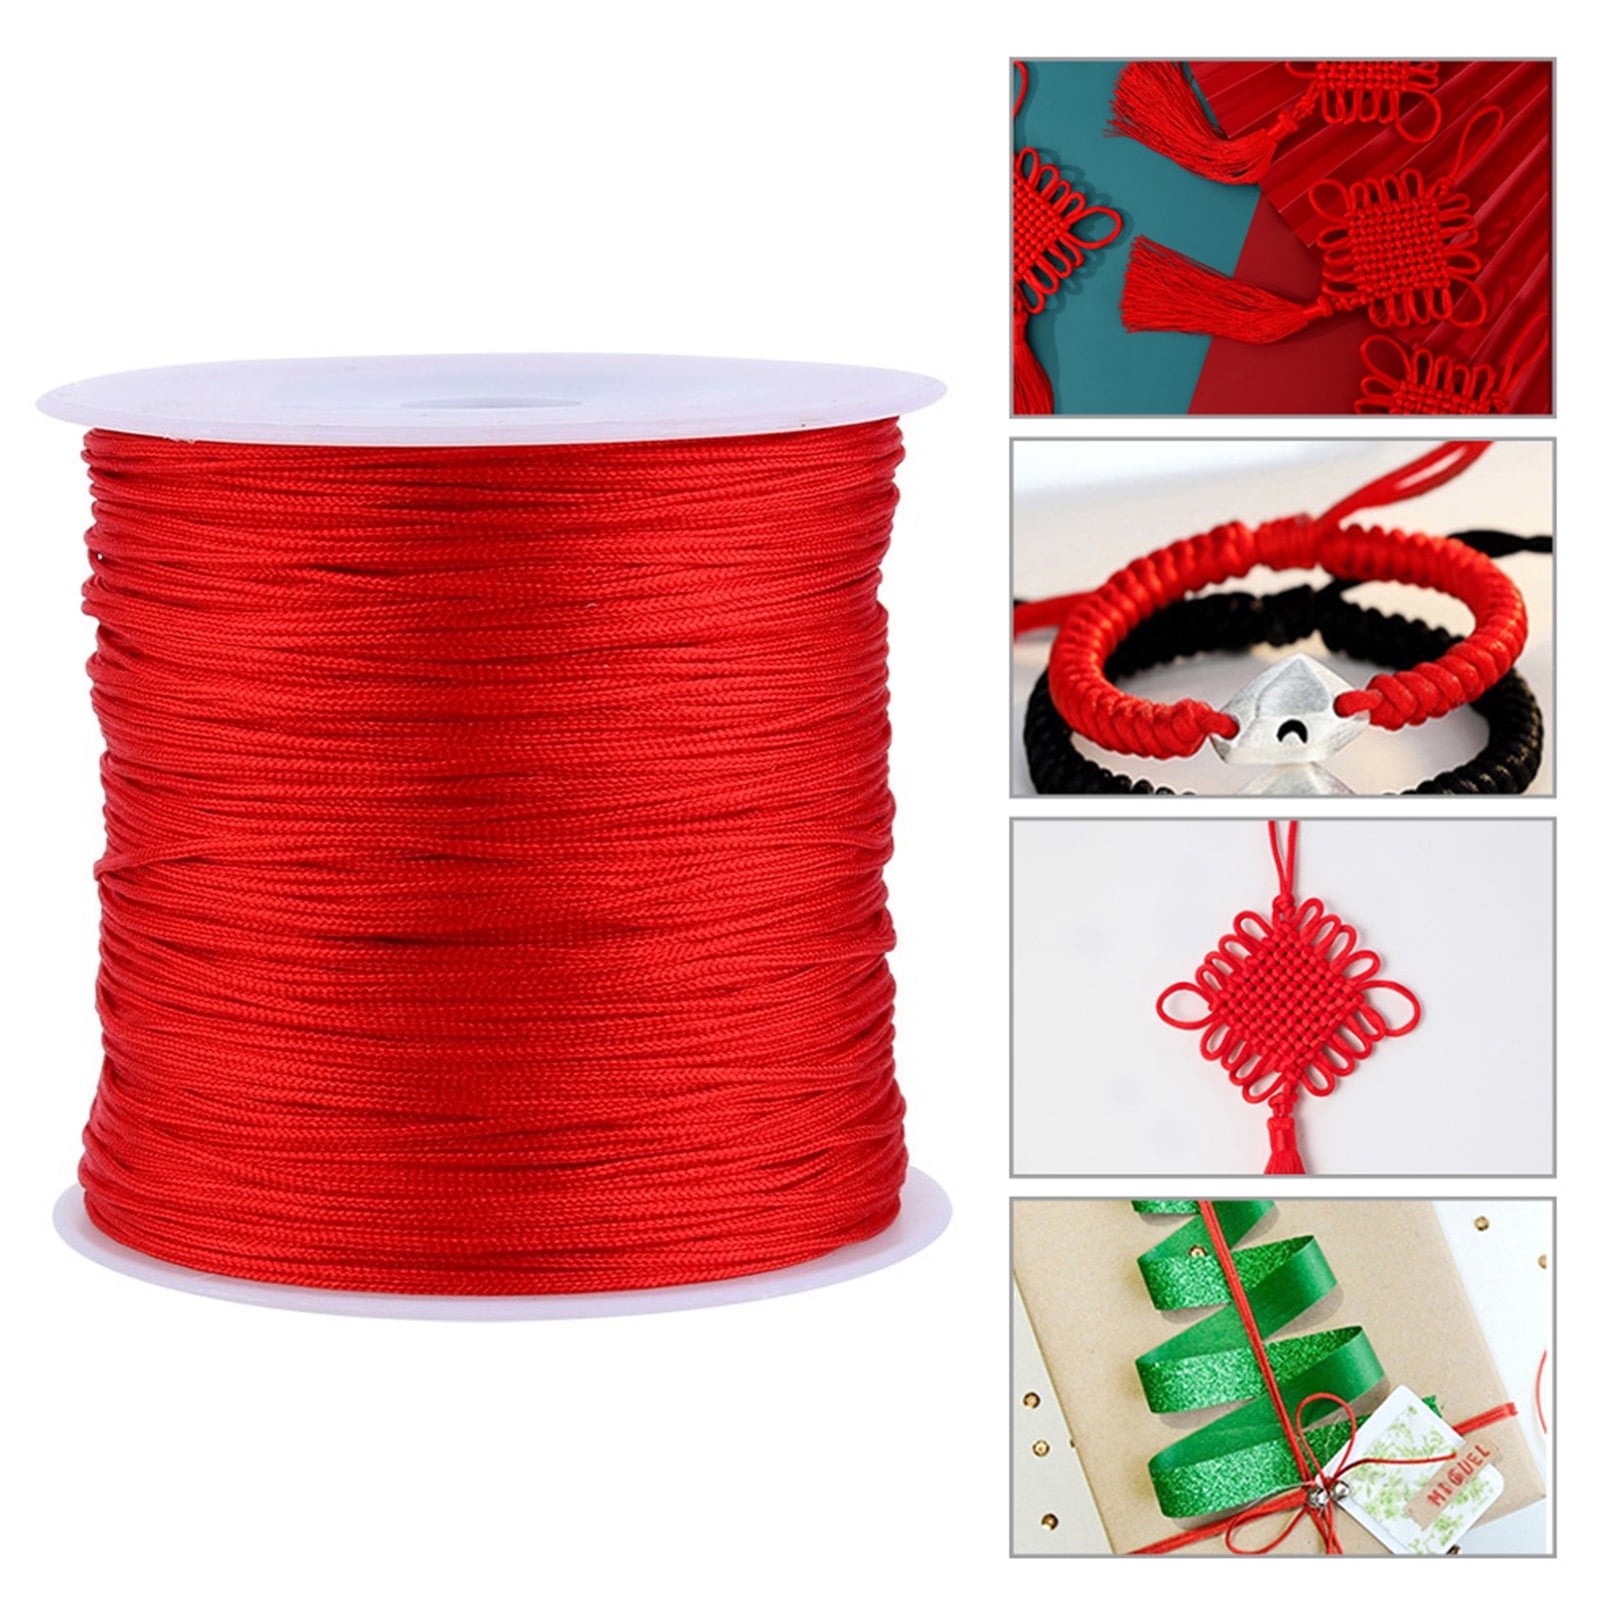 Nylon Cord / 1mm Nylon Cord / Jewelry Cord / Jewelry Making Cord / Jewelry  Making / Nylon / Craft String / Cherry Colored Cord / 10 Meters 